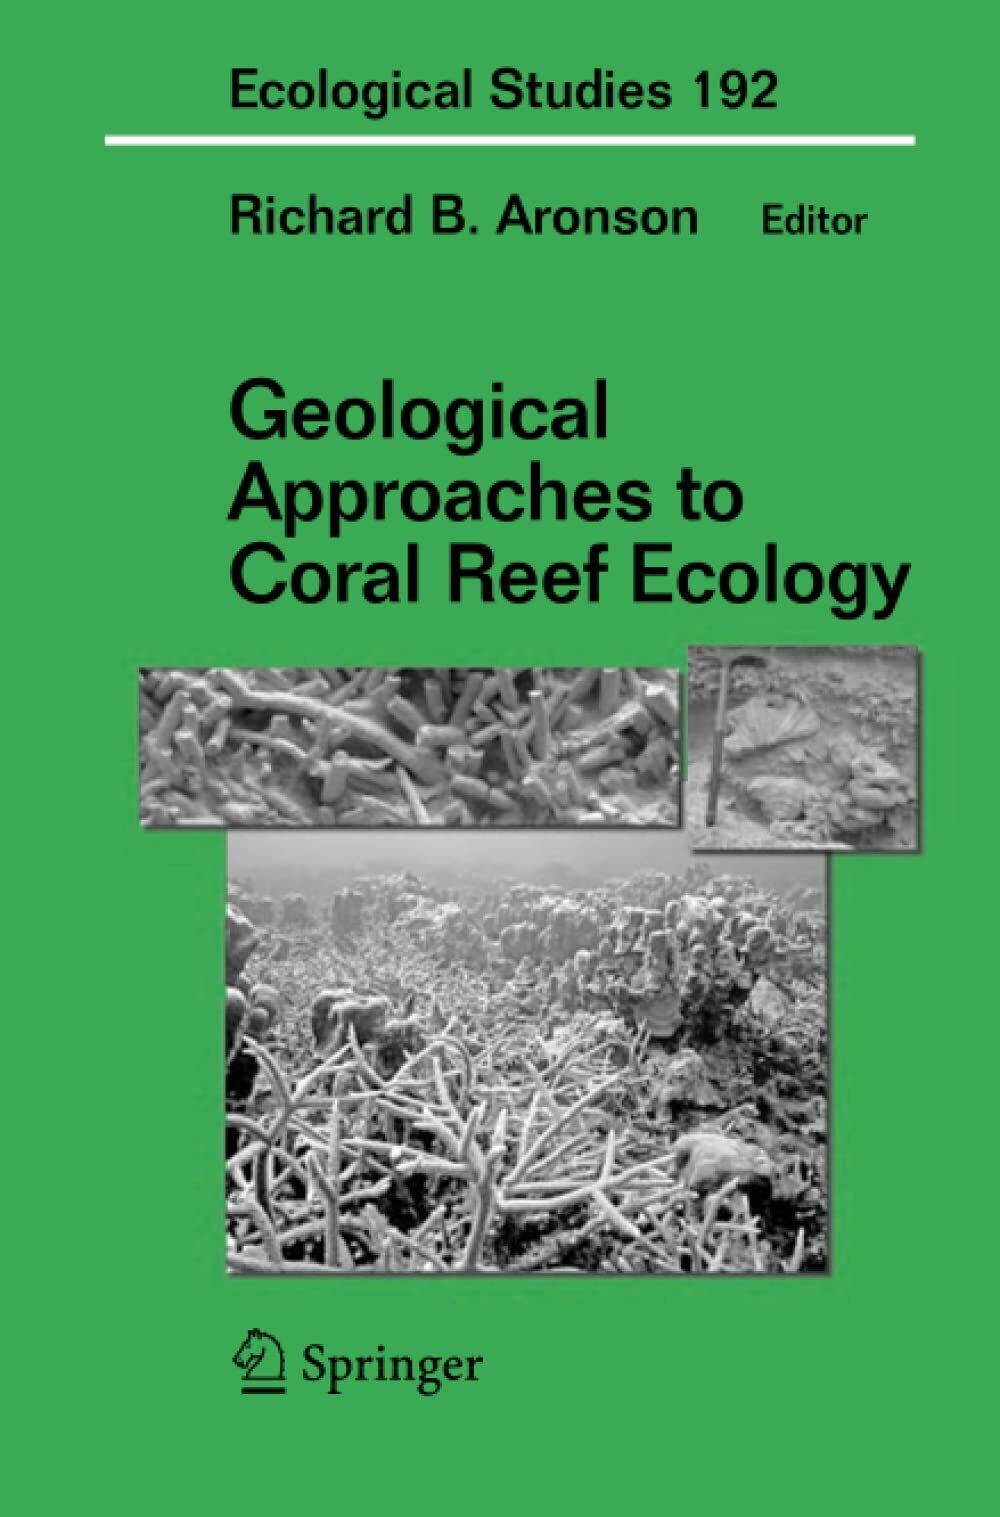 Geological Approaches to Coral Reef Ecology - Richard B. Aronson - Springer,2011